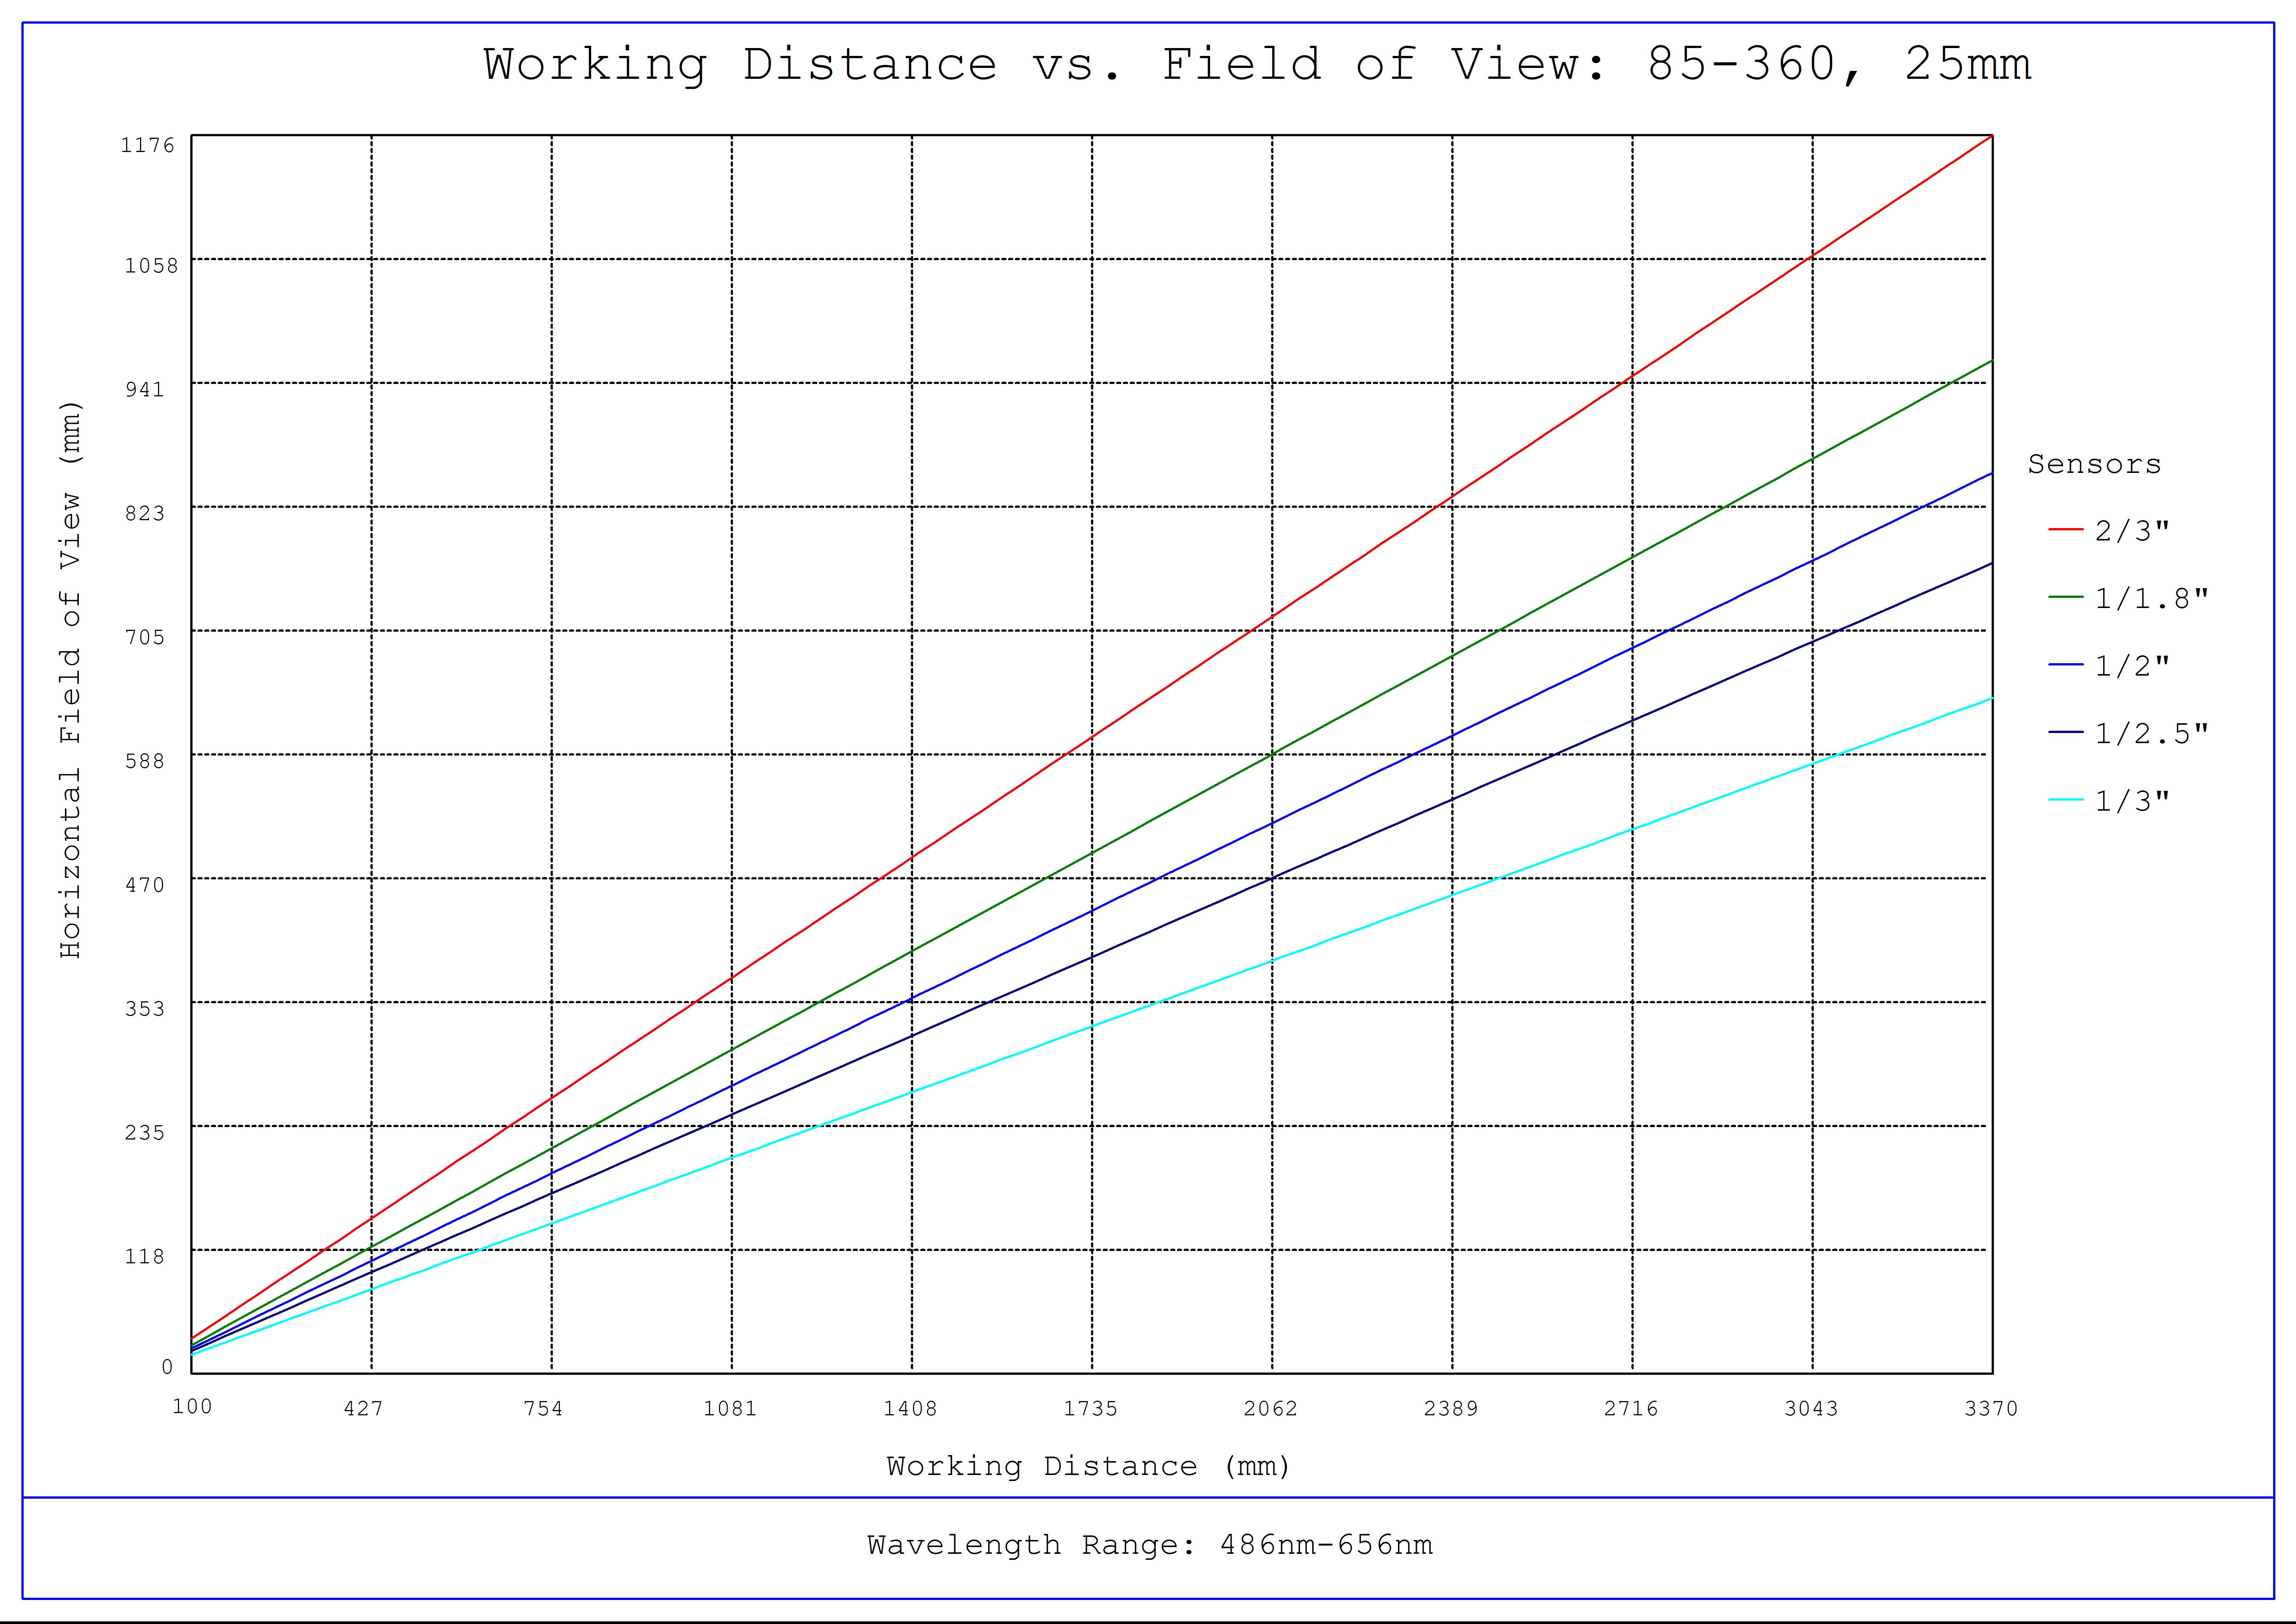 #85-360, 25mm, f/8 Ci Series Fixed Focal Length Lens, Working Distance versus Field of View Plot